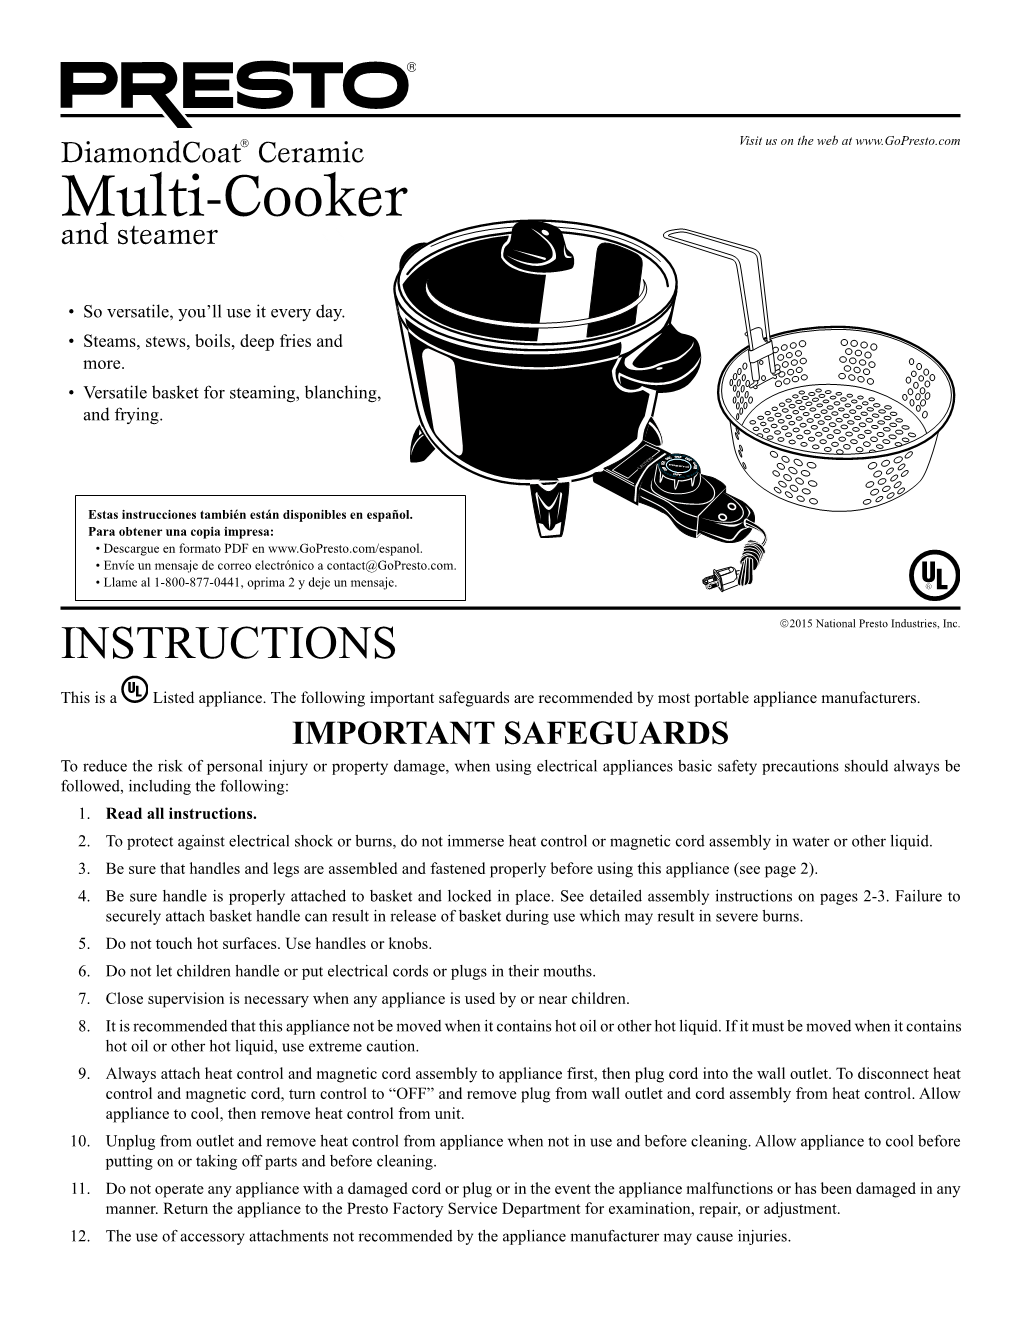 Multi-Cooker and Steamer